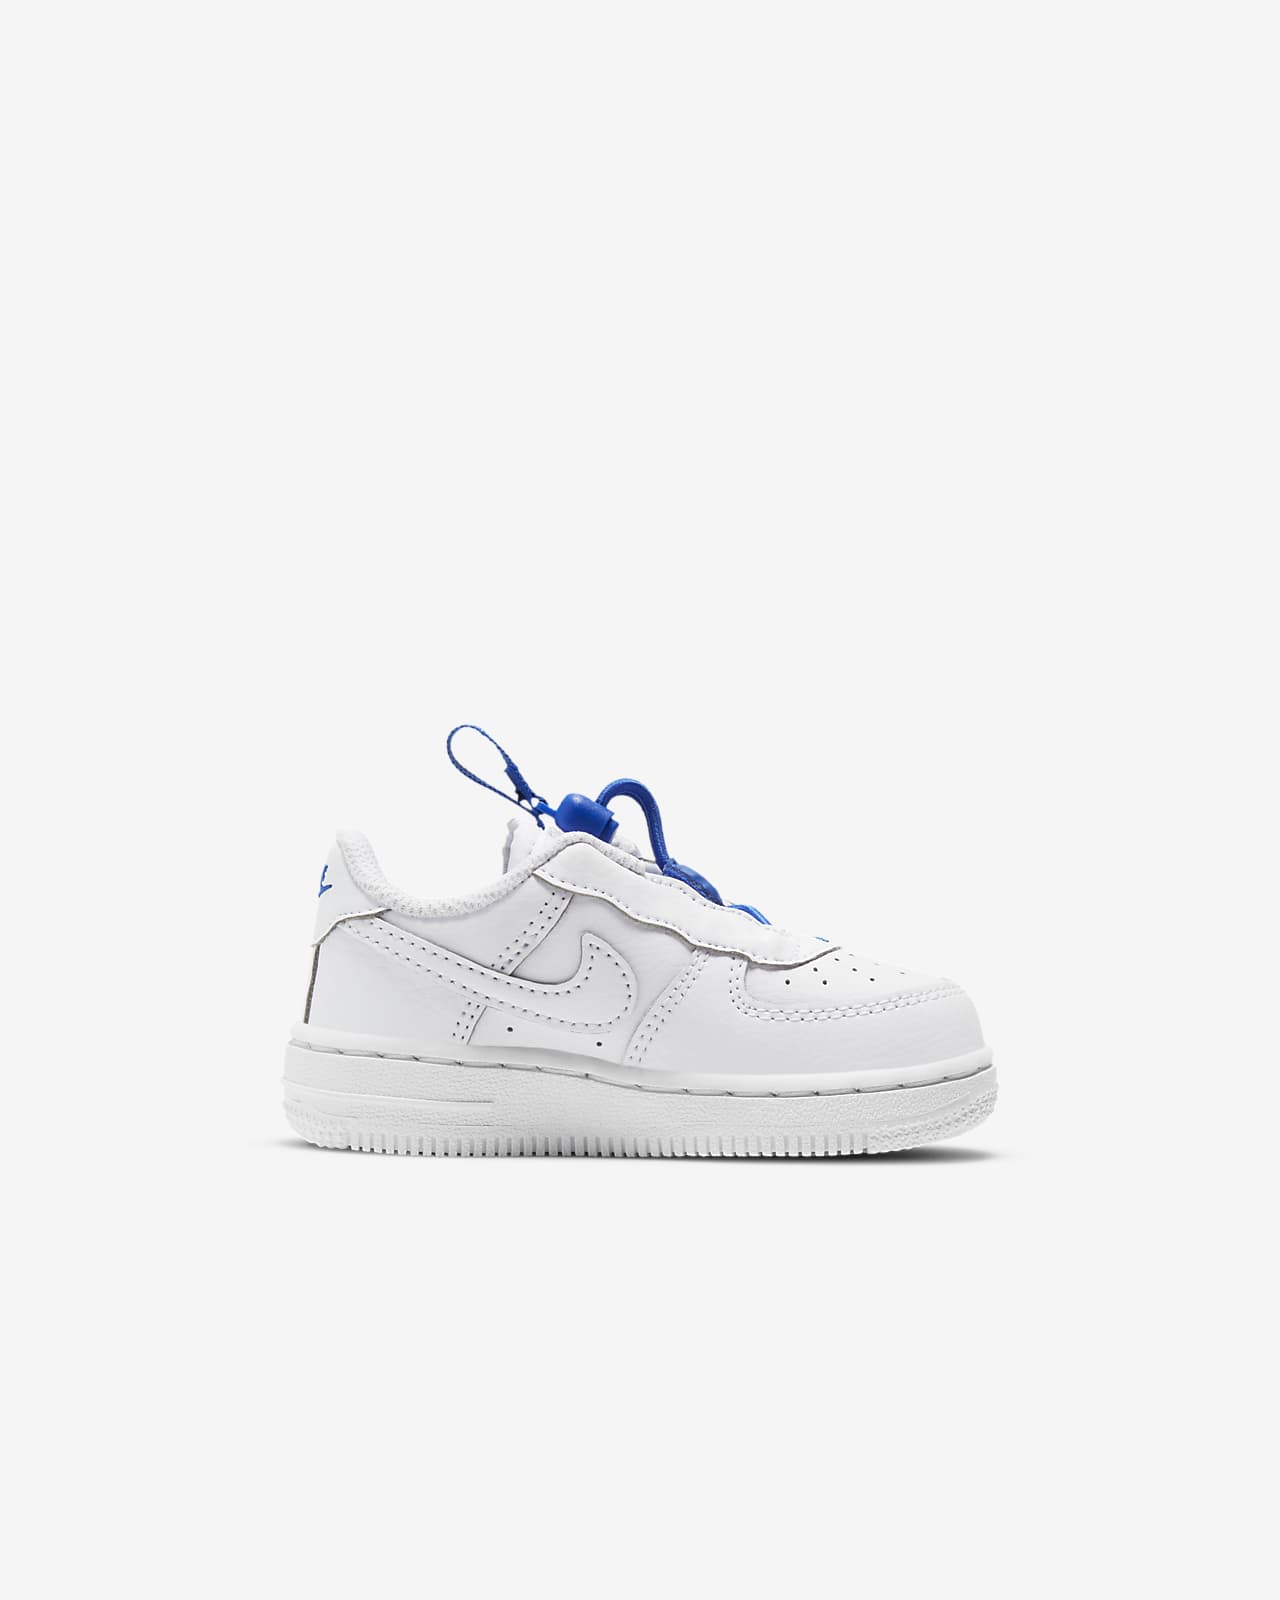 nike force 1 baby shoes